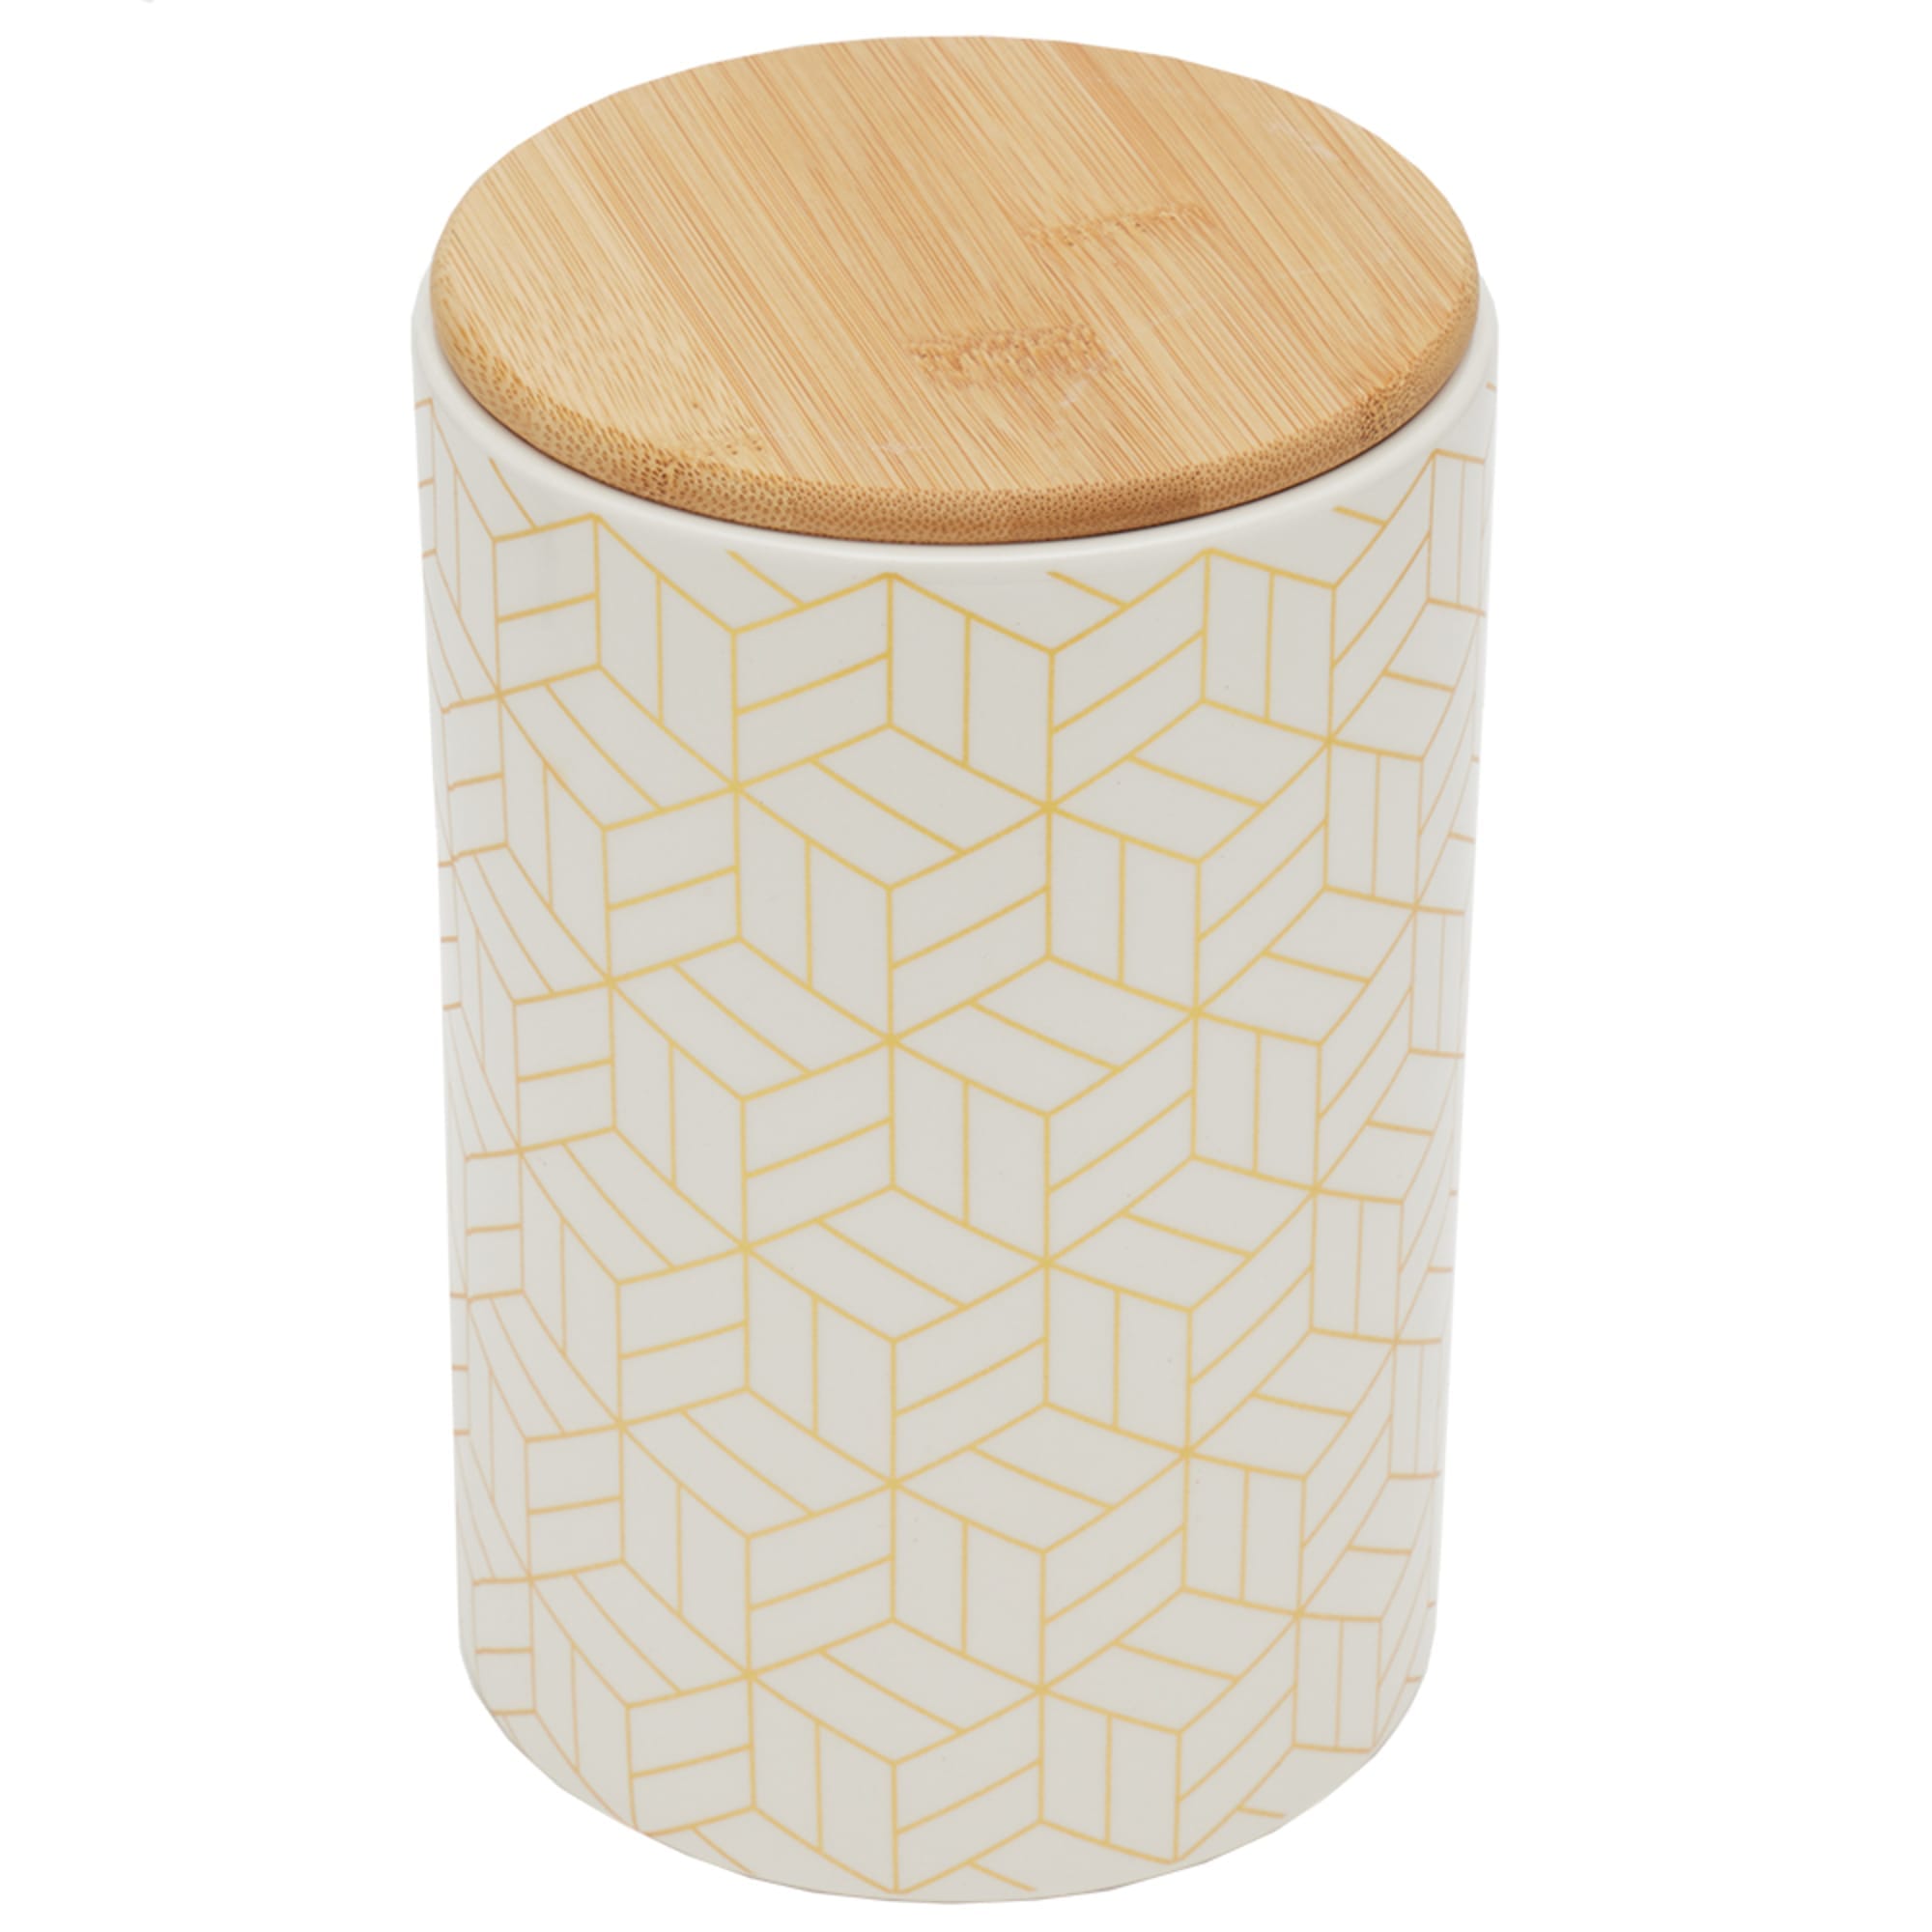 Home Basics Cubix Large Ceramic Canister with Bamboo Top $7.00 EACH, CASE PACK OF 12